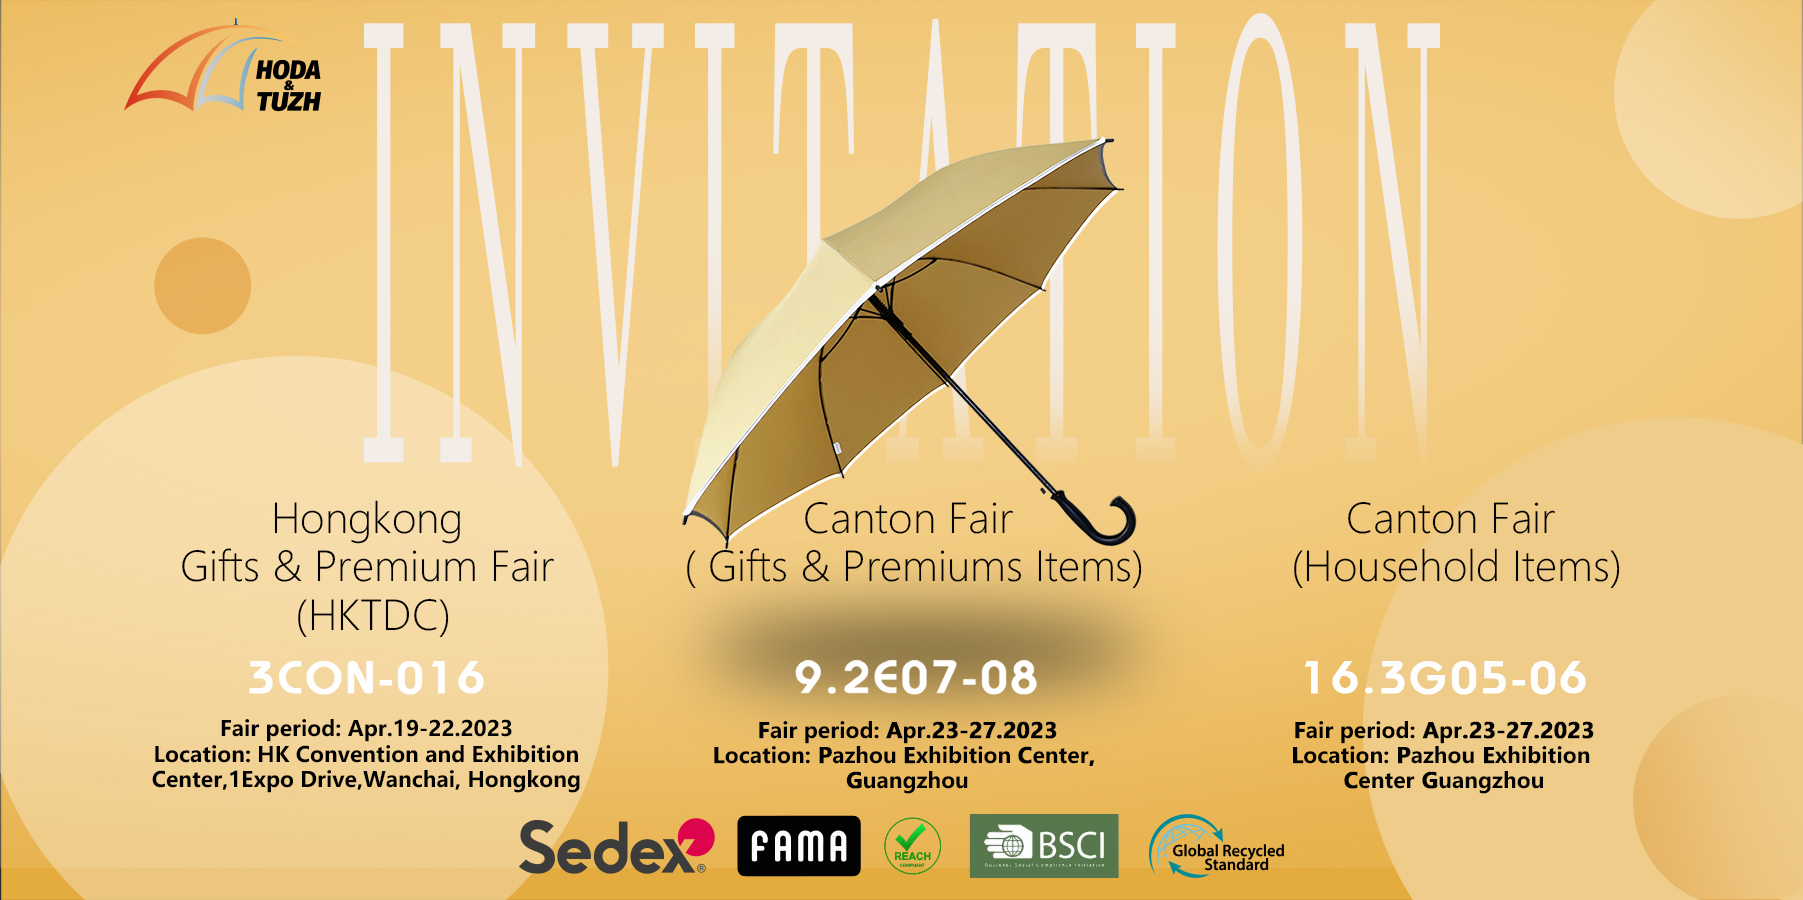 Join Us at the Canton Fair and Discover Our Stylish and Functional Umbrellas